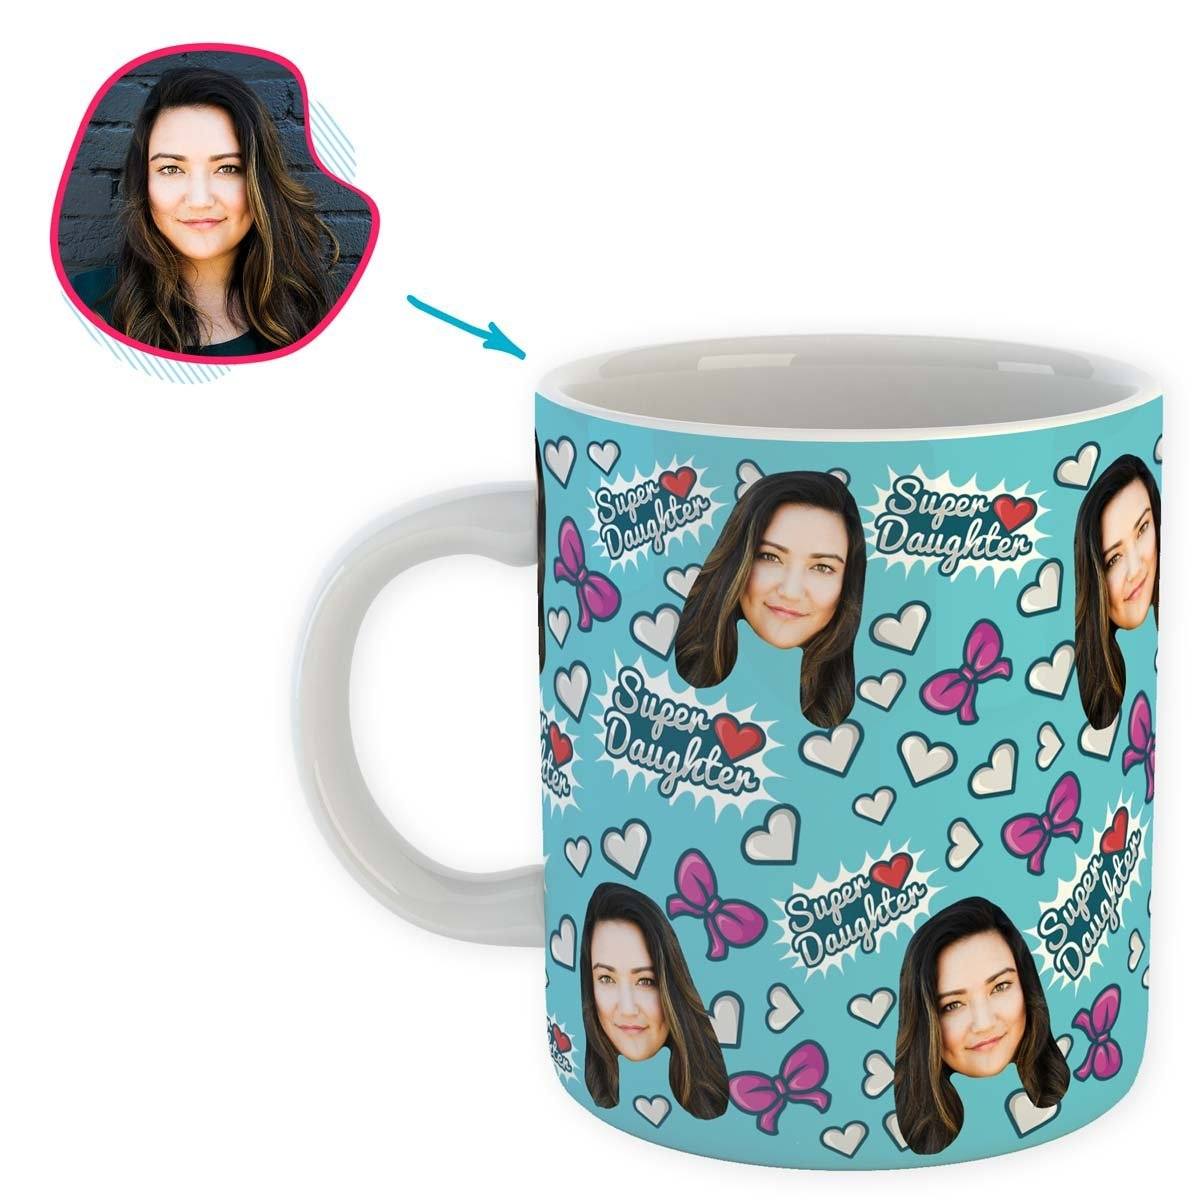 blue Super Daughter mug personalized with photo of face printed on it